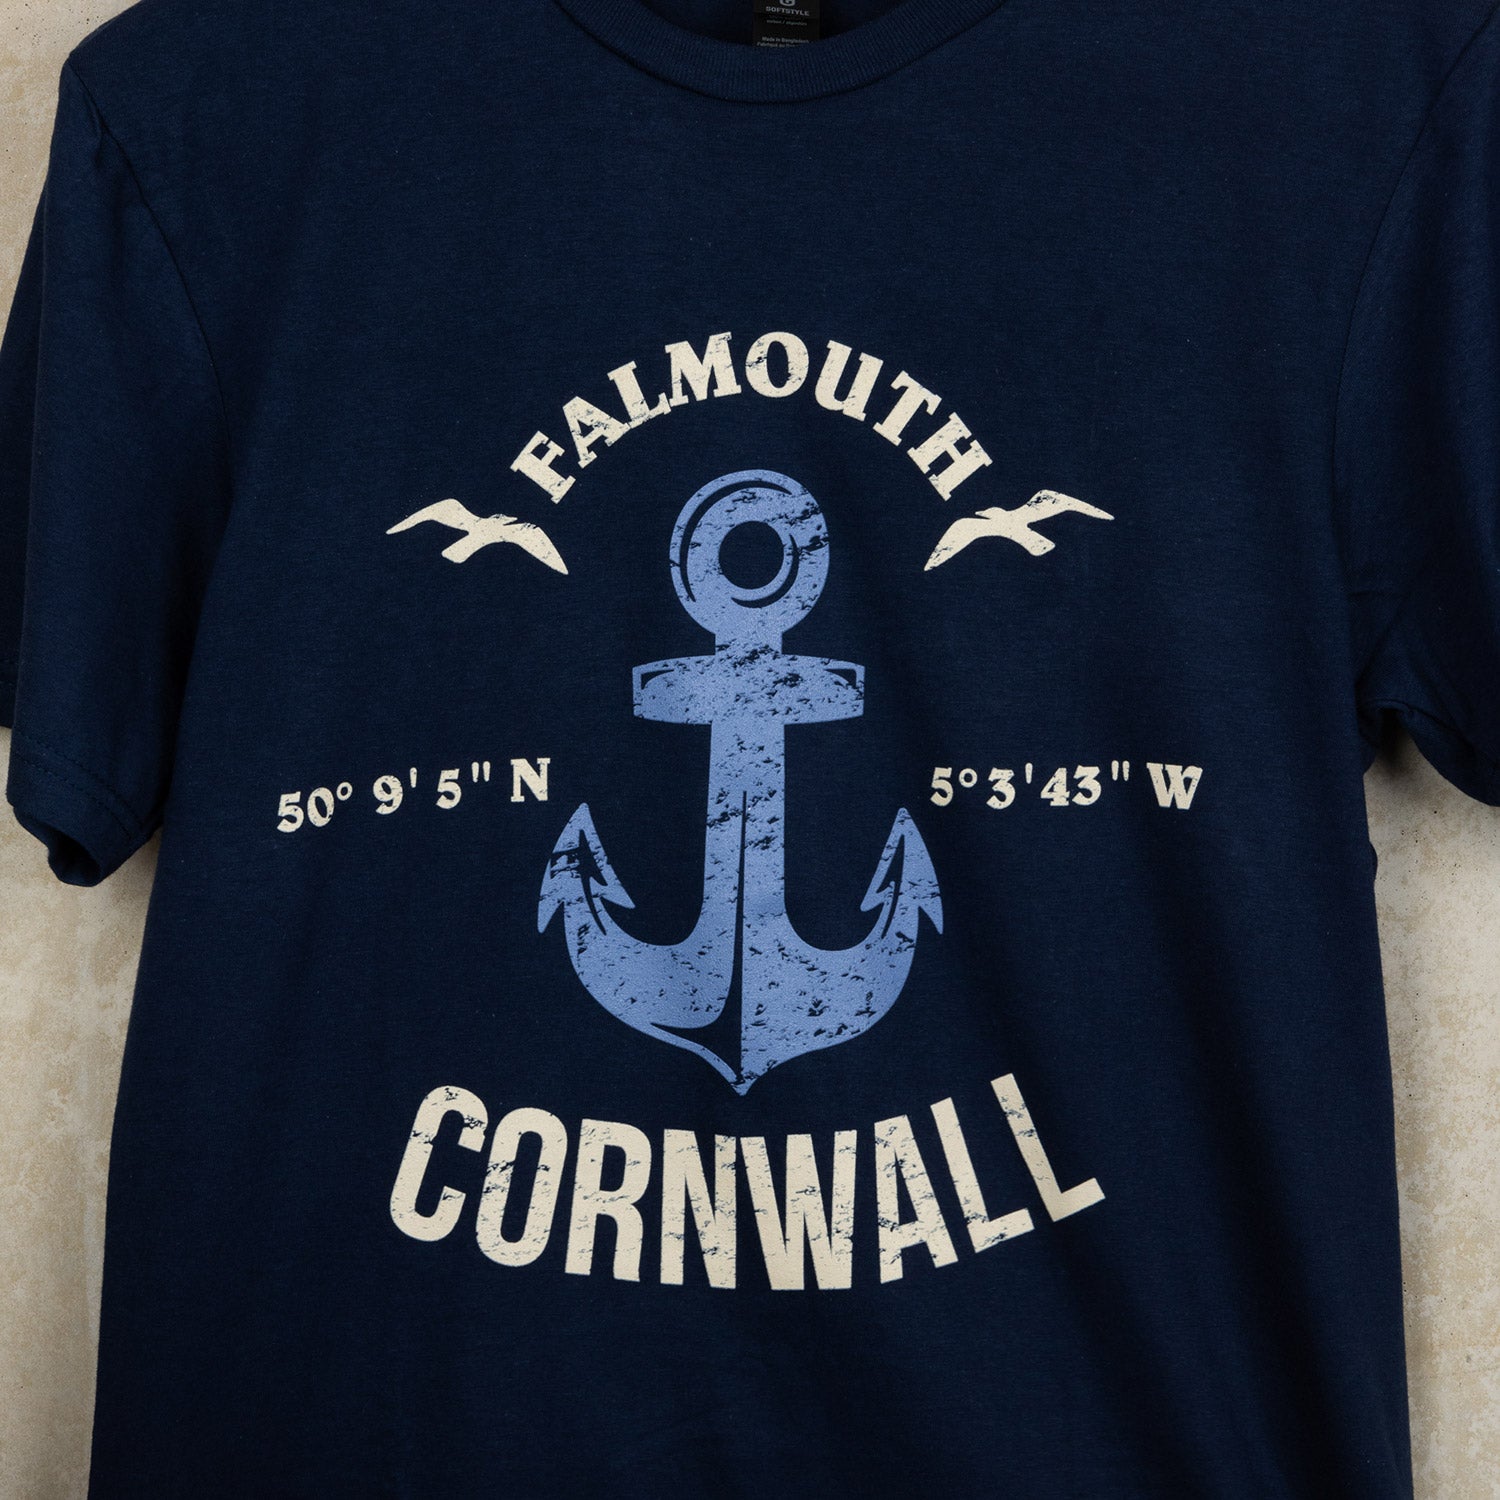 Close up of navy blue cotton t-shirt with bespoke design featuring the wording Falmouth, Cornwall around a distressed blue anchor.